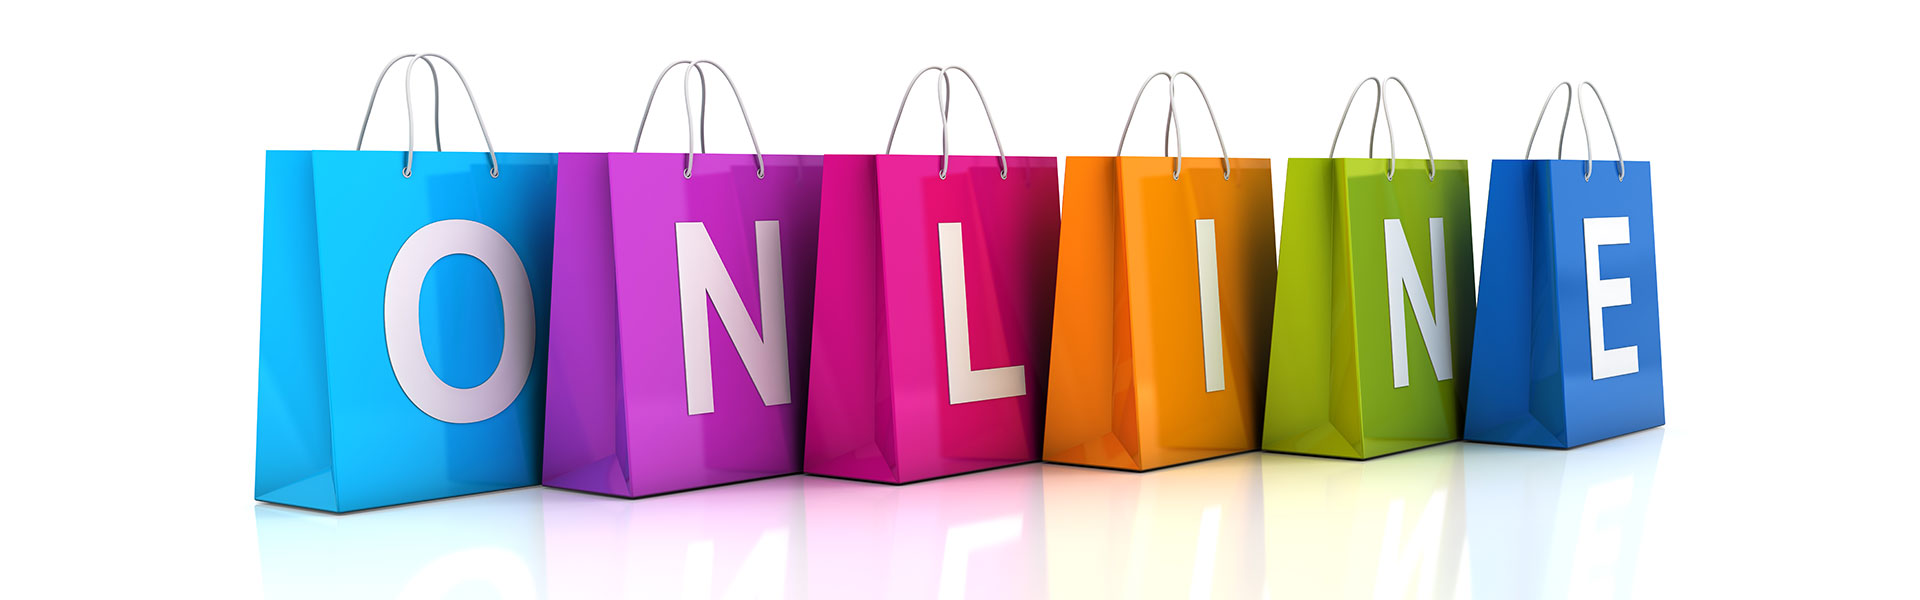 Affordable Web Design Ltd offers effective flexible online store sites to help our clients achieve their goals!